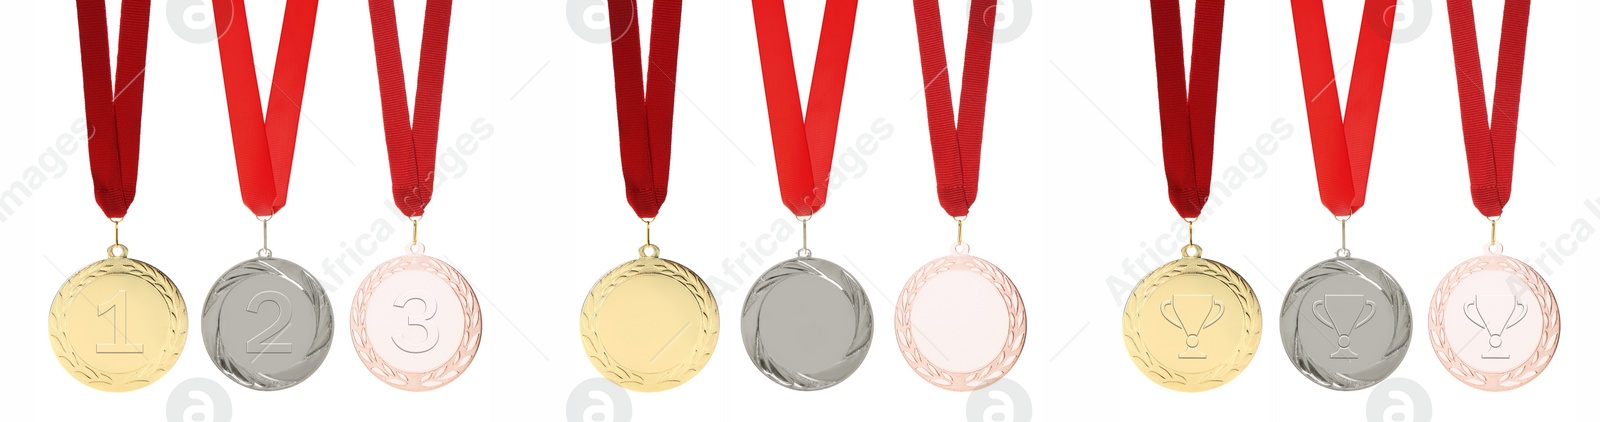 Image of Gold, silver and bronze medals isolated on white, set